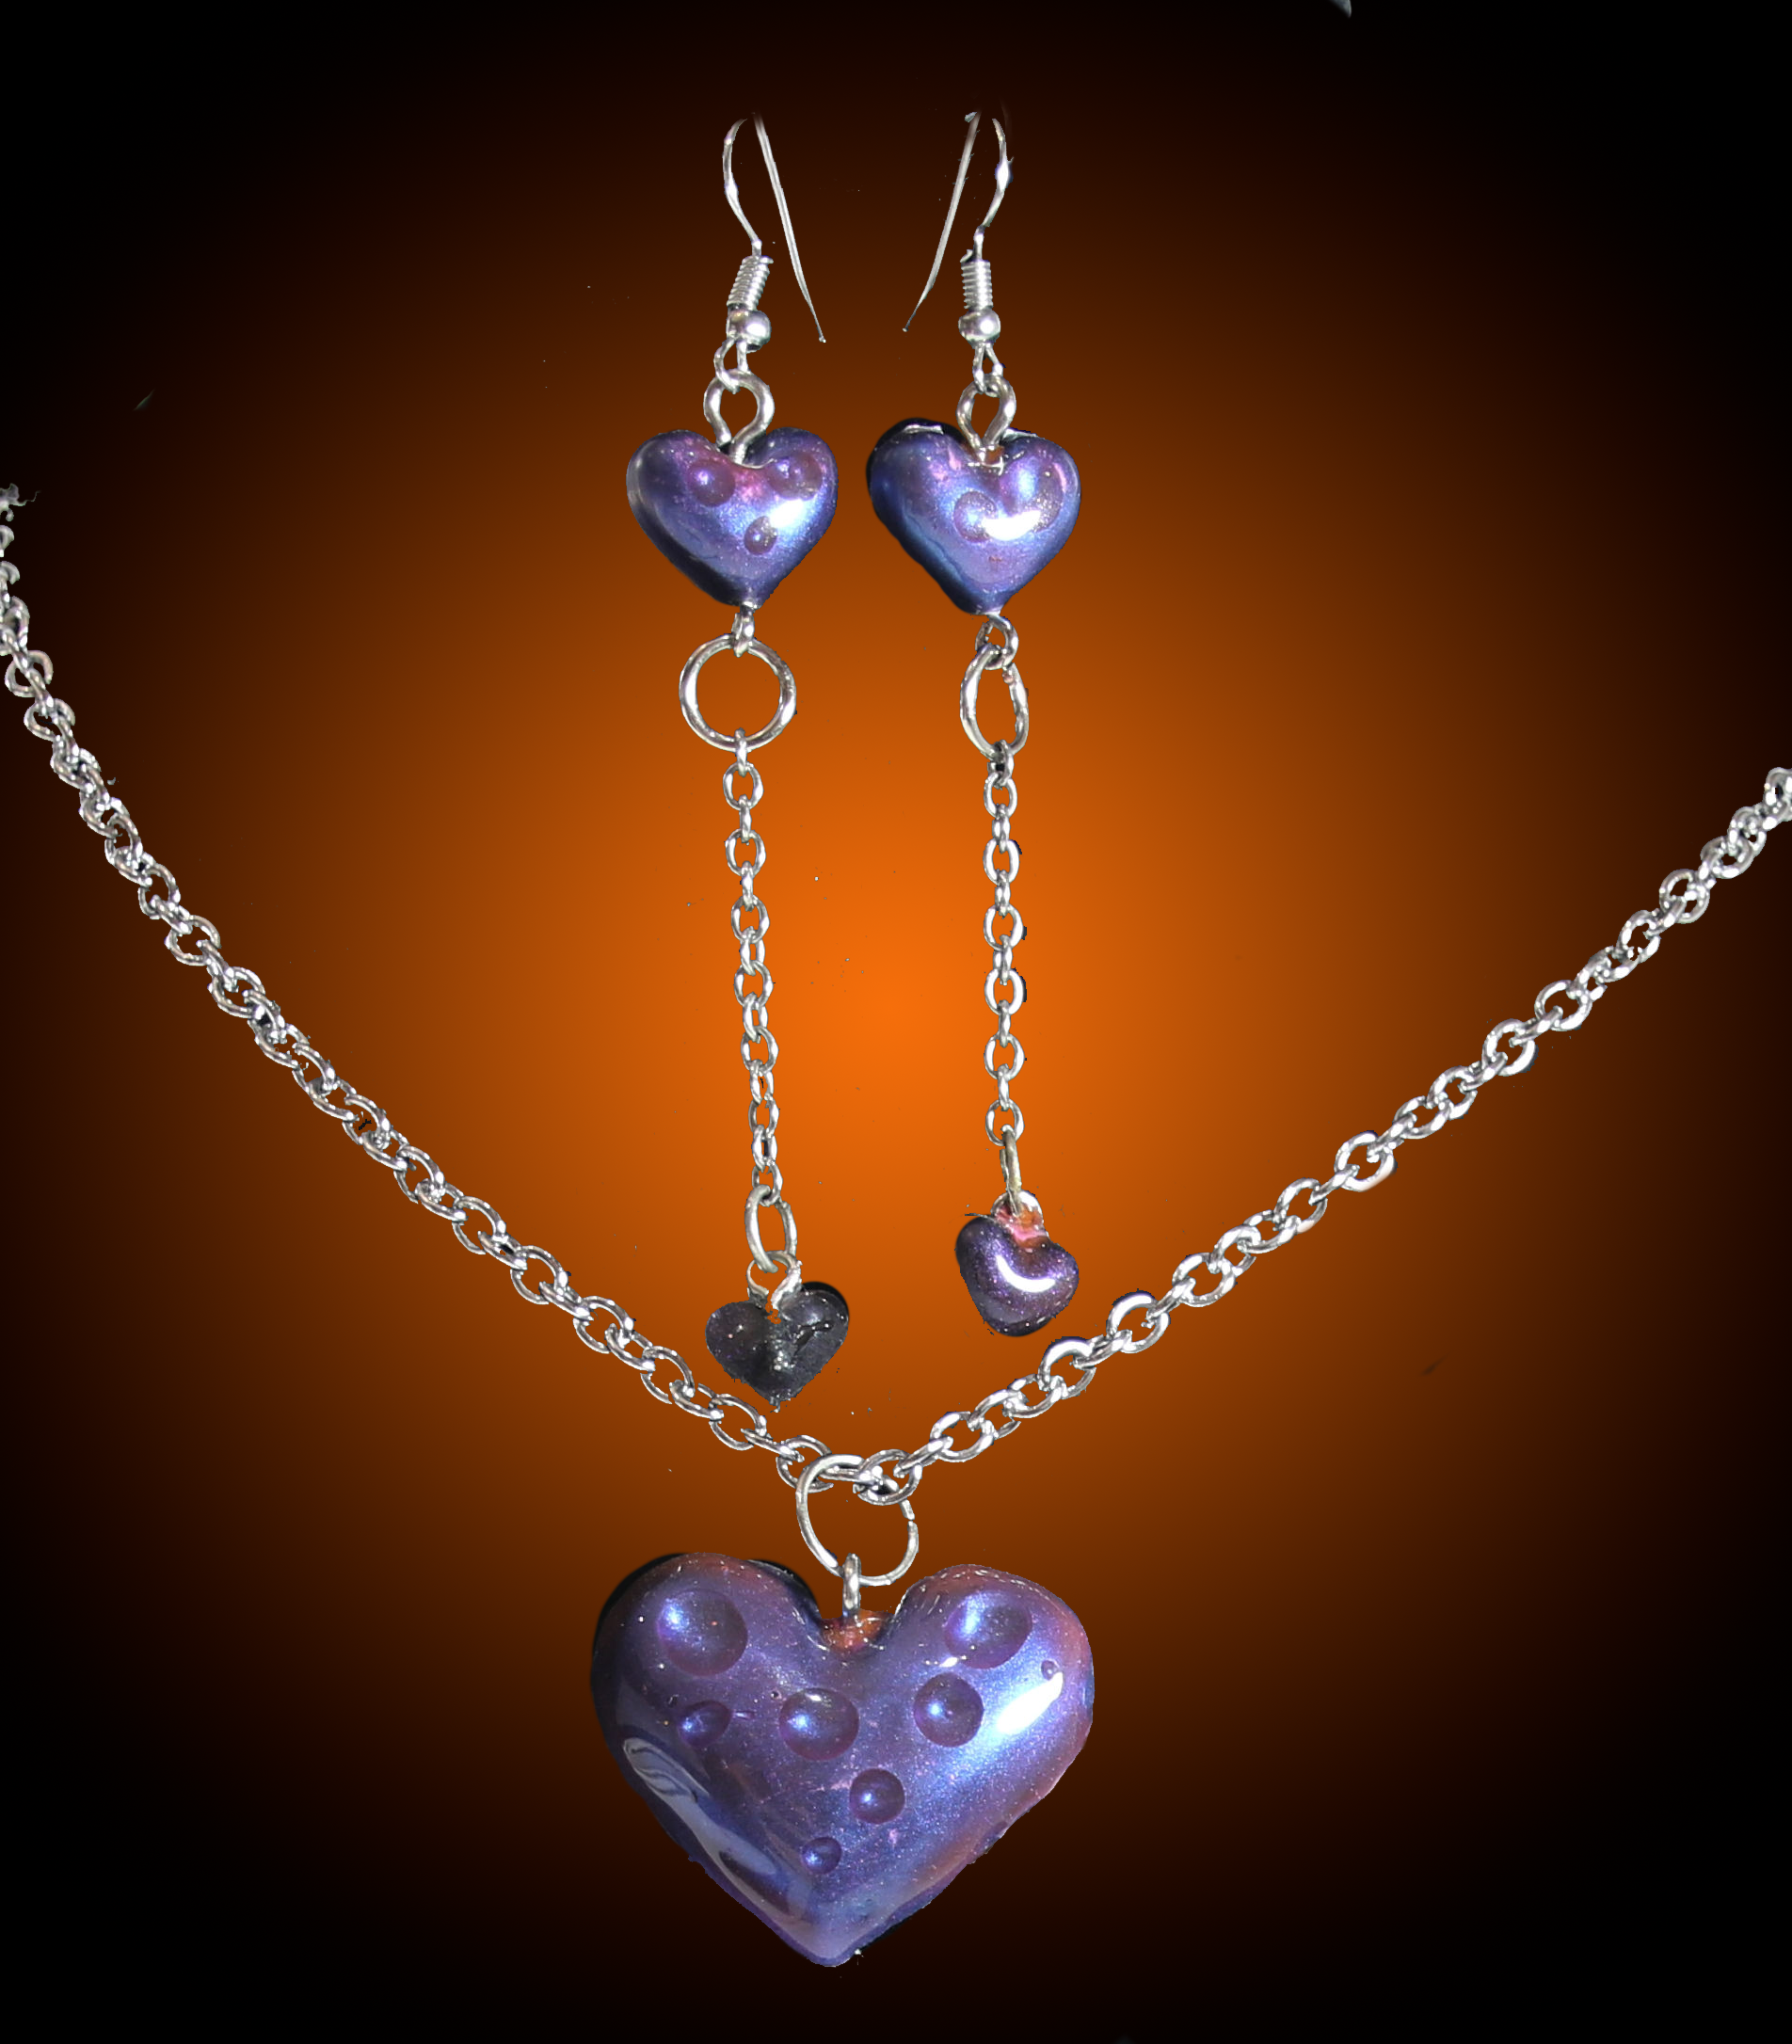 Purple Water Droplet Effect Heart Shaped Necklace with Matching Earring Set